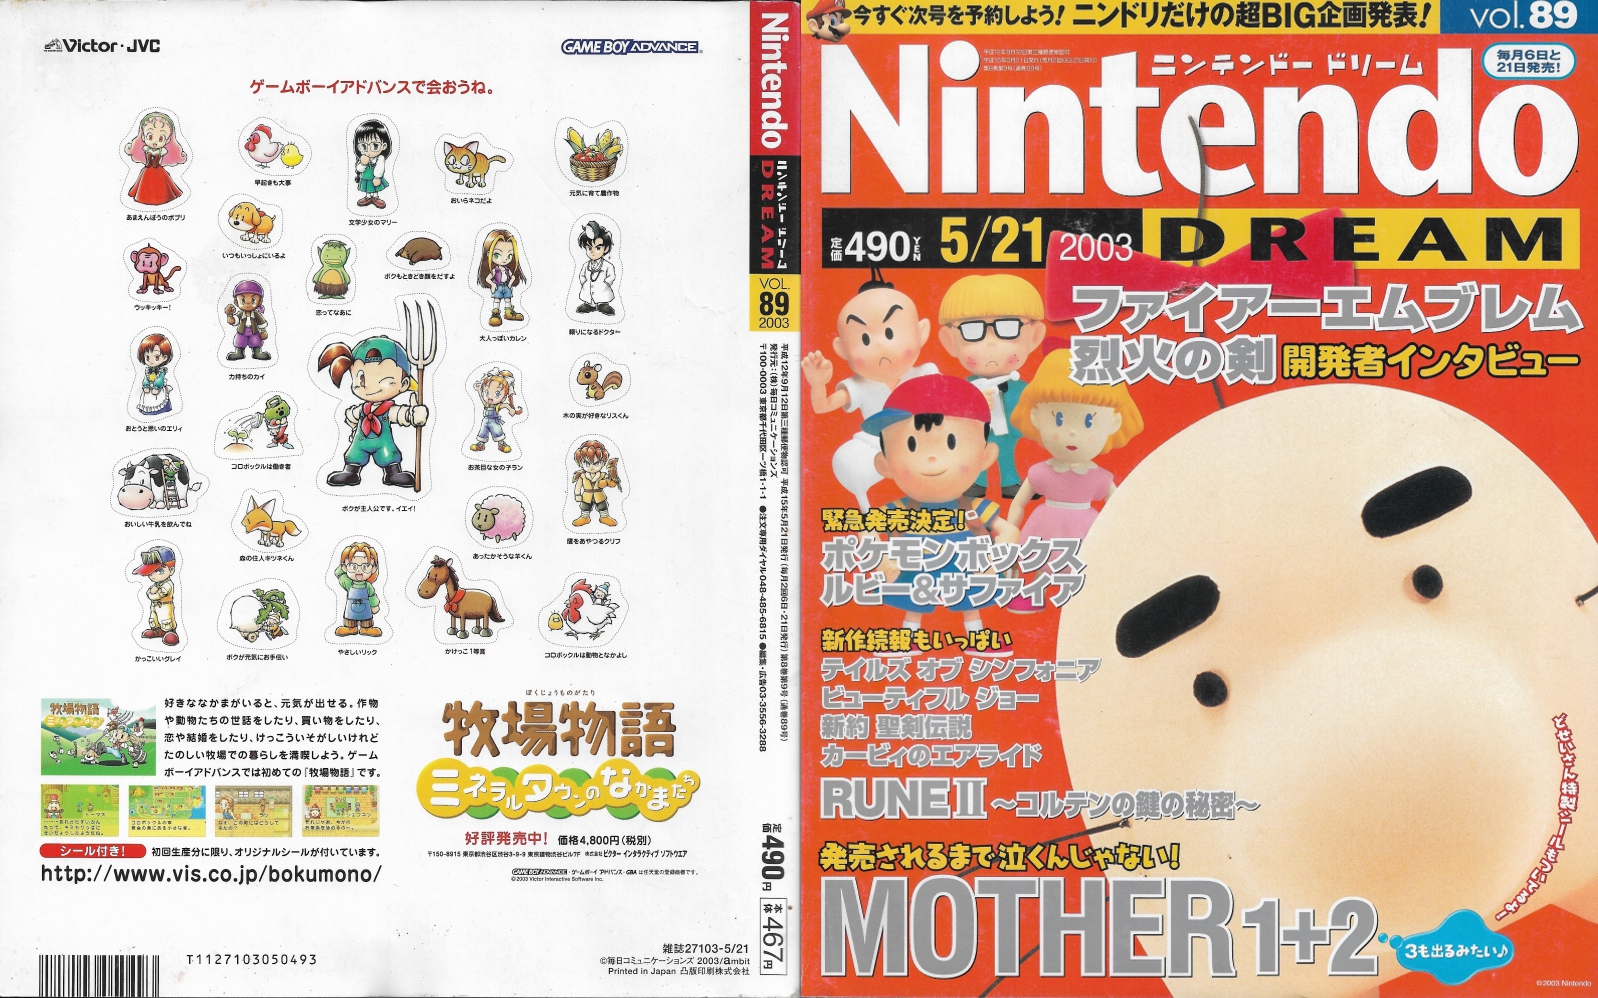 front and back cover scans of the Nintendo DREAM Vol. 89. the front has various earthbound characters in clay models (ness, paula, poo, jeff) superimopsed on a red background, with mr saturn taking the largest part of the page. there are various headlines in japanese. the back is an ad for harvest moon: friends of mineral town, featuring many characters and animals in a collage with a white background. each drawing has a dotted cut out line around it. in the bottom of the ad are game screenshots, a website address, and the game's logo.